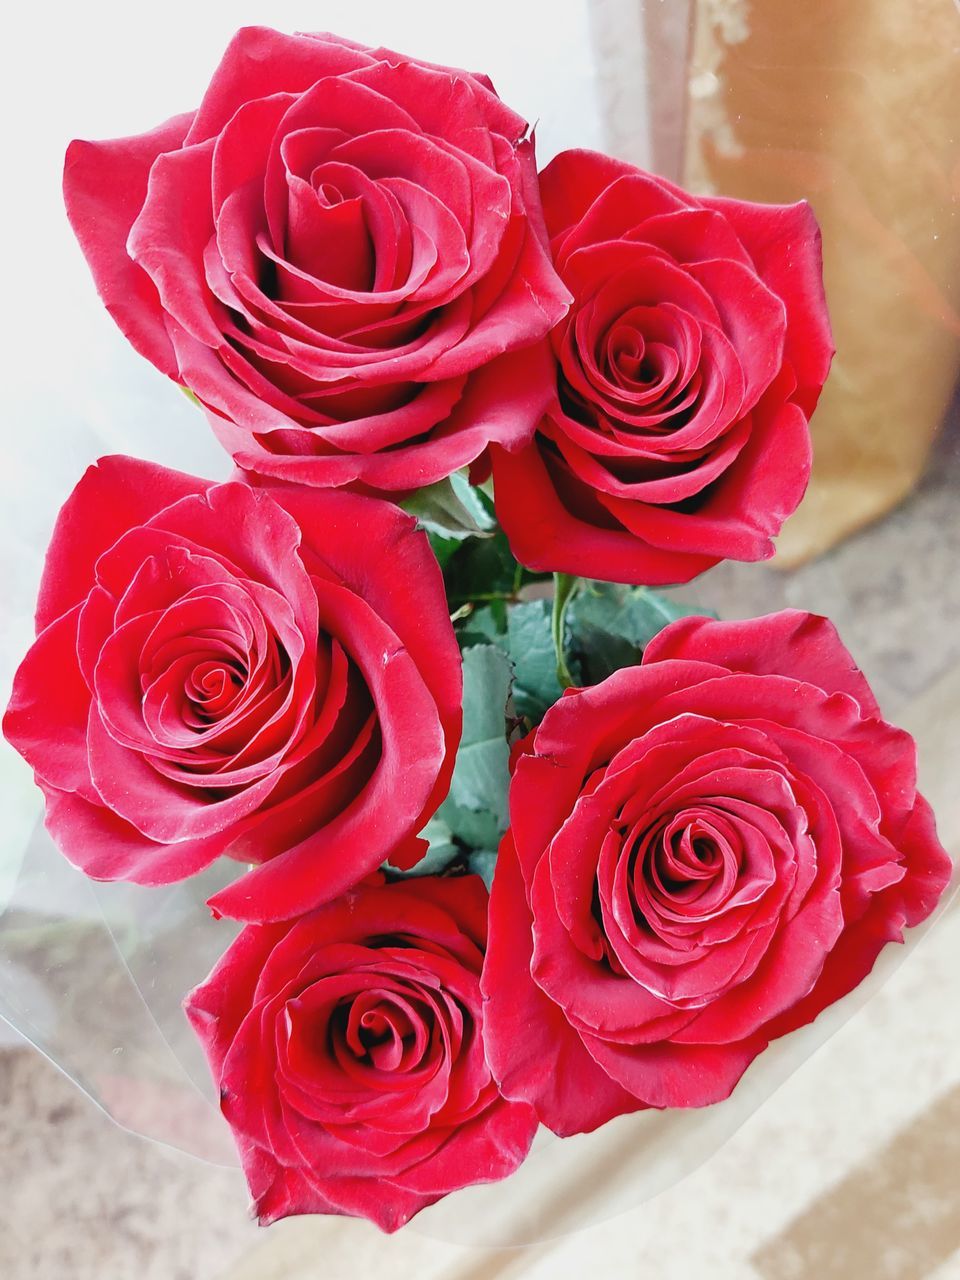 rose, flower, pink, flowering plant, red, plant, beauty in nature, nature, freshness, garden roses, bouquet, flower arrangement, petal, flower head, fragility, close-up, cut flowers, love, inflorescence, no people, valentine's day, emotion, positive emotion, celebration, arrangement, bunch of flowers, high angle view, outdoors